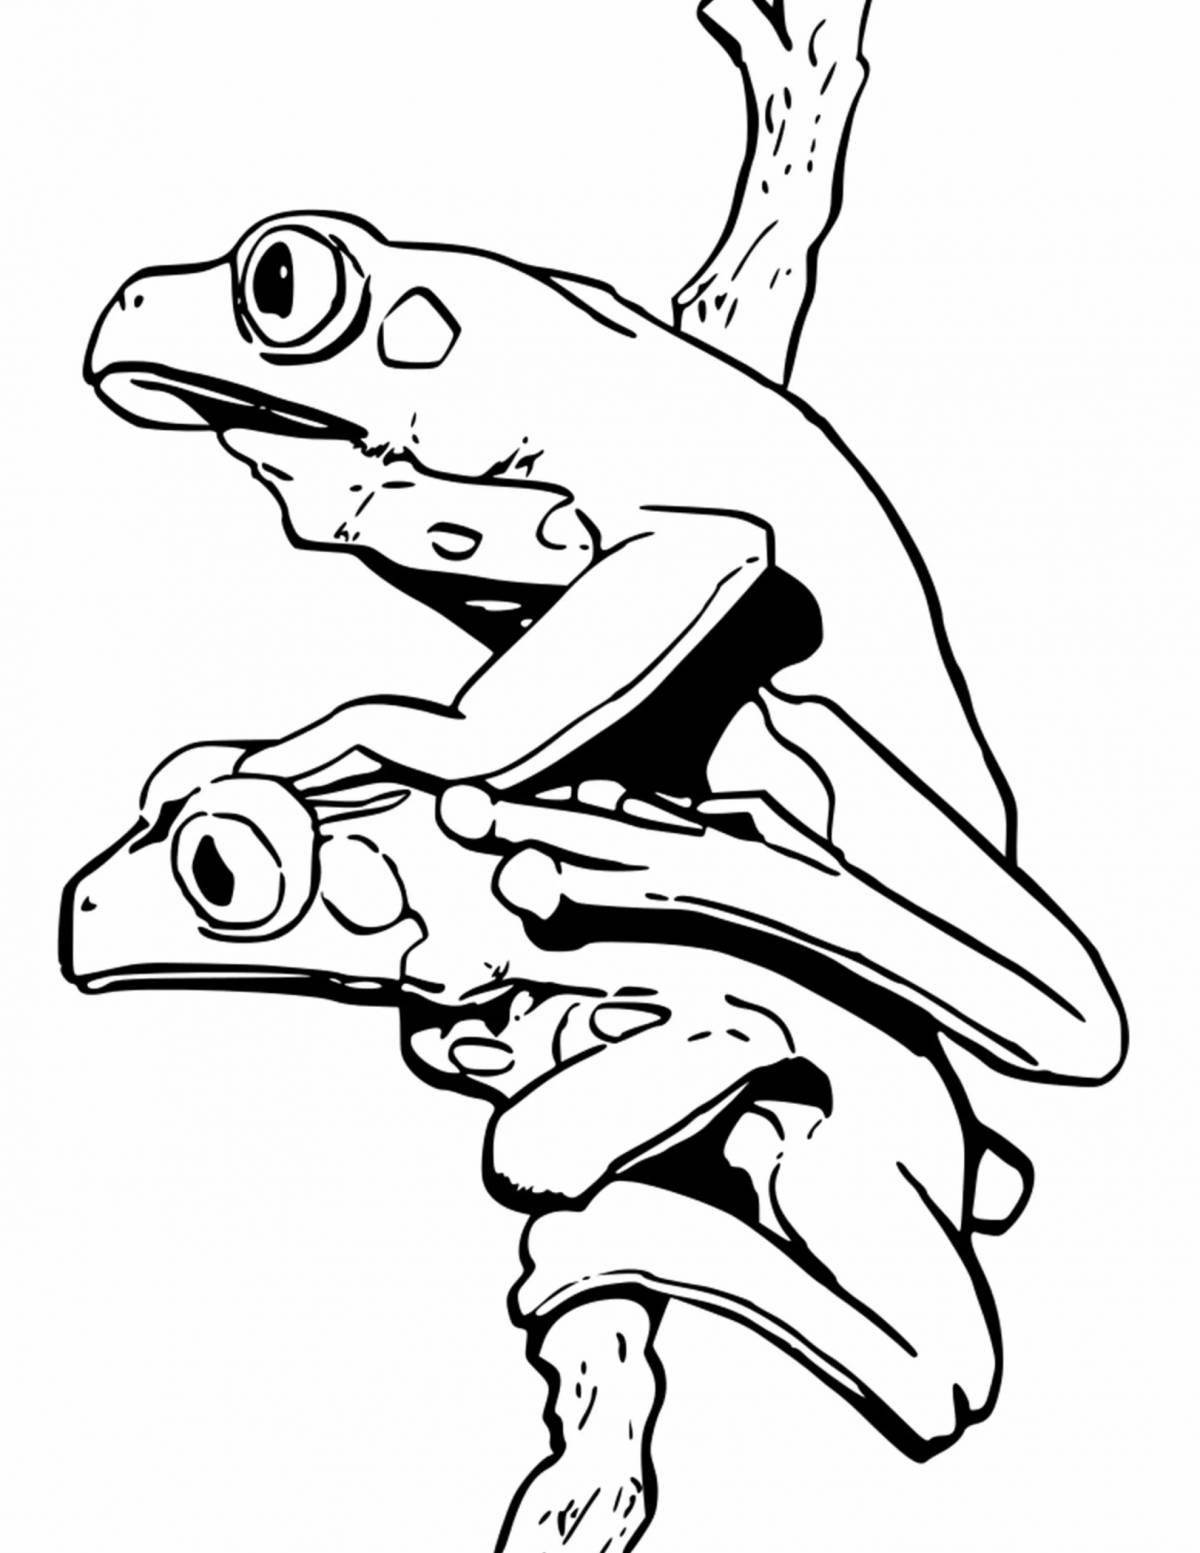 Animated frog coloring page